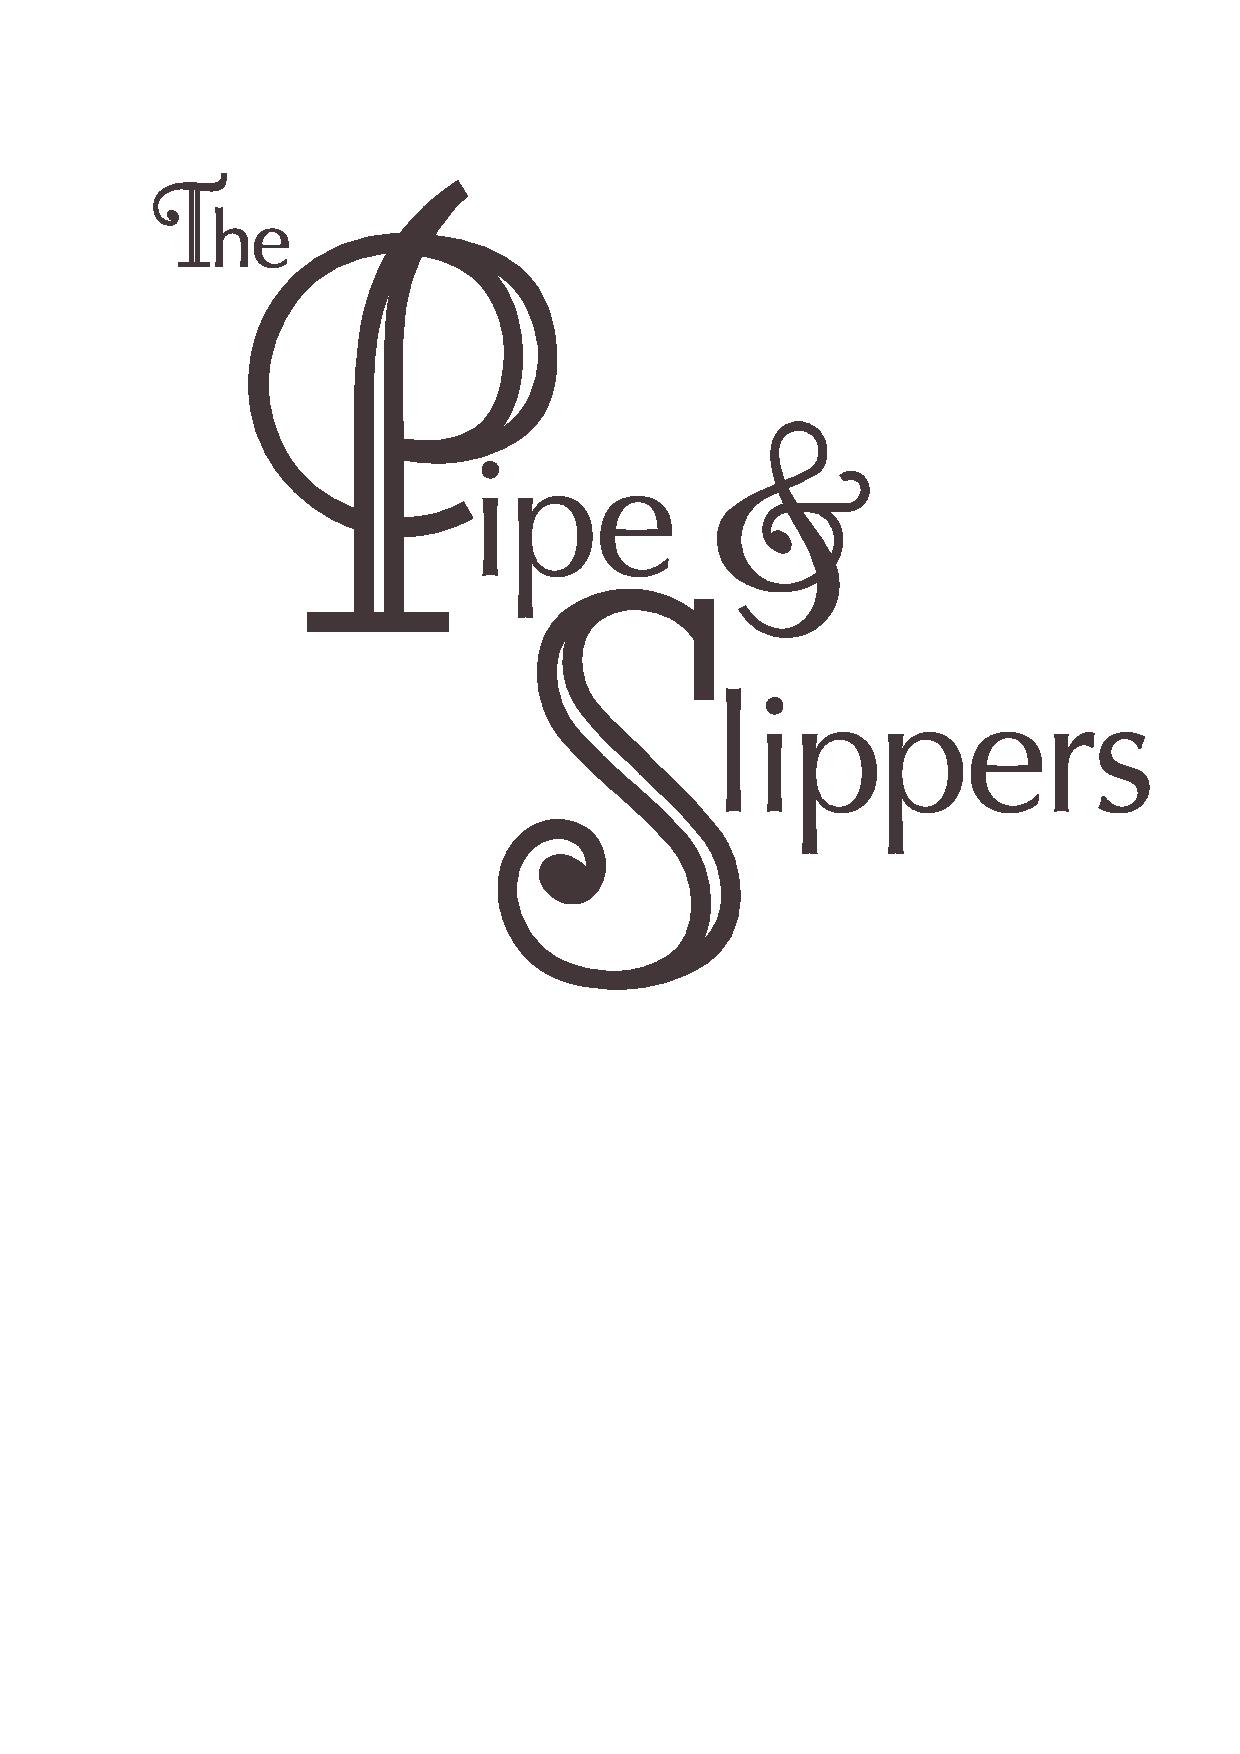 logo for The Pipe and Slippers